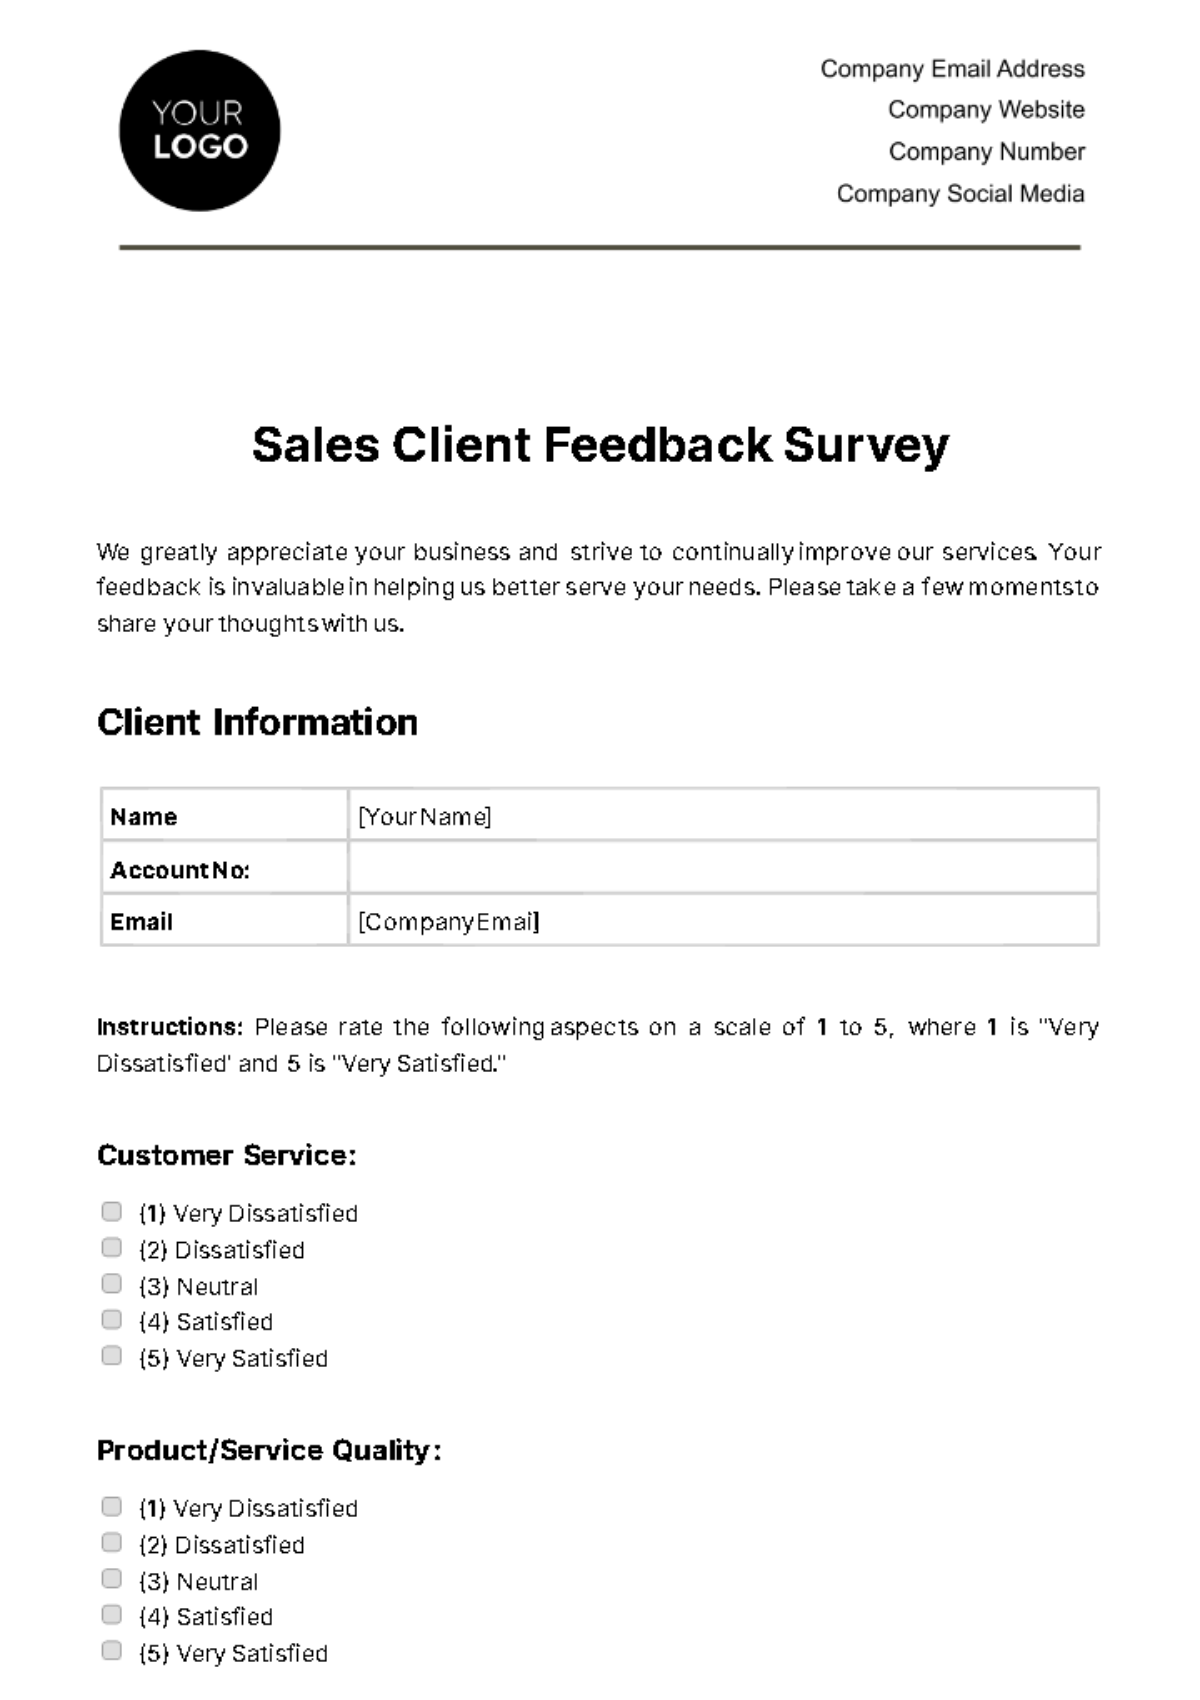 Free Sales Client Feedback Survey Template